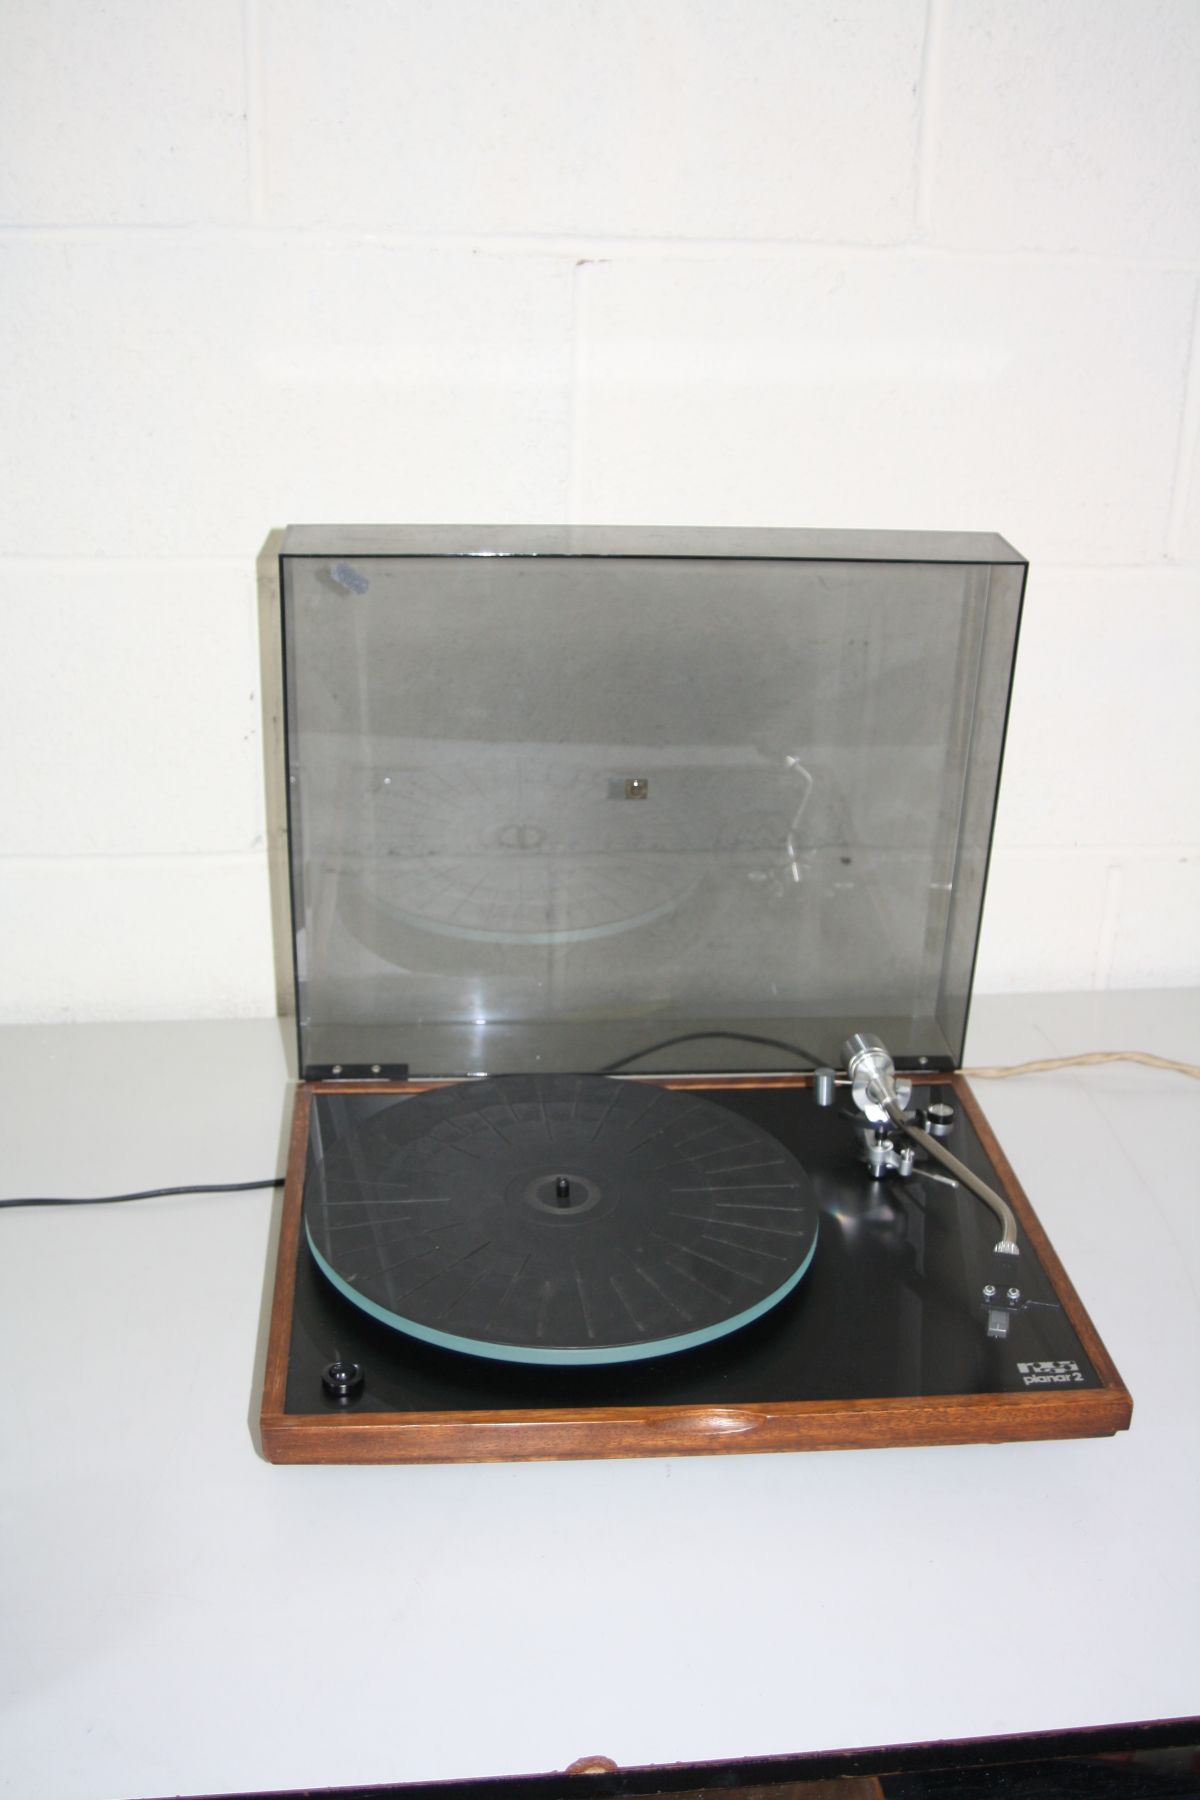 A REGA PLANER 2 TURNTABLE with a smoked perspex lid, a walnut plinth and a Linn K5 cartridge